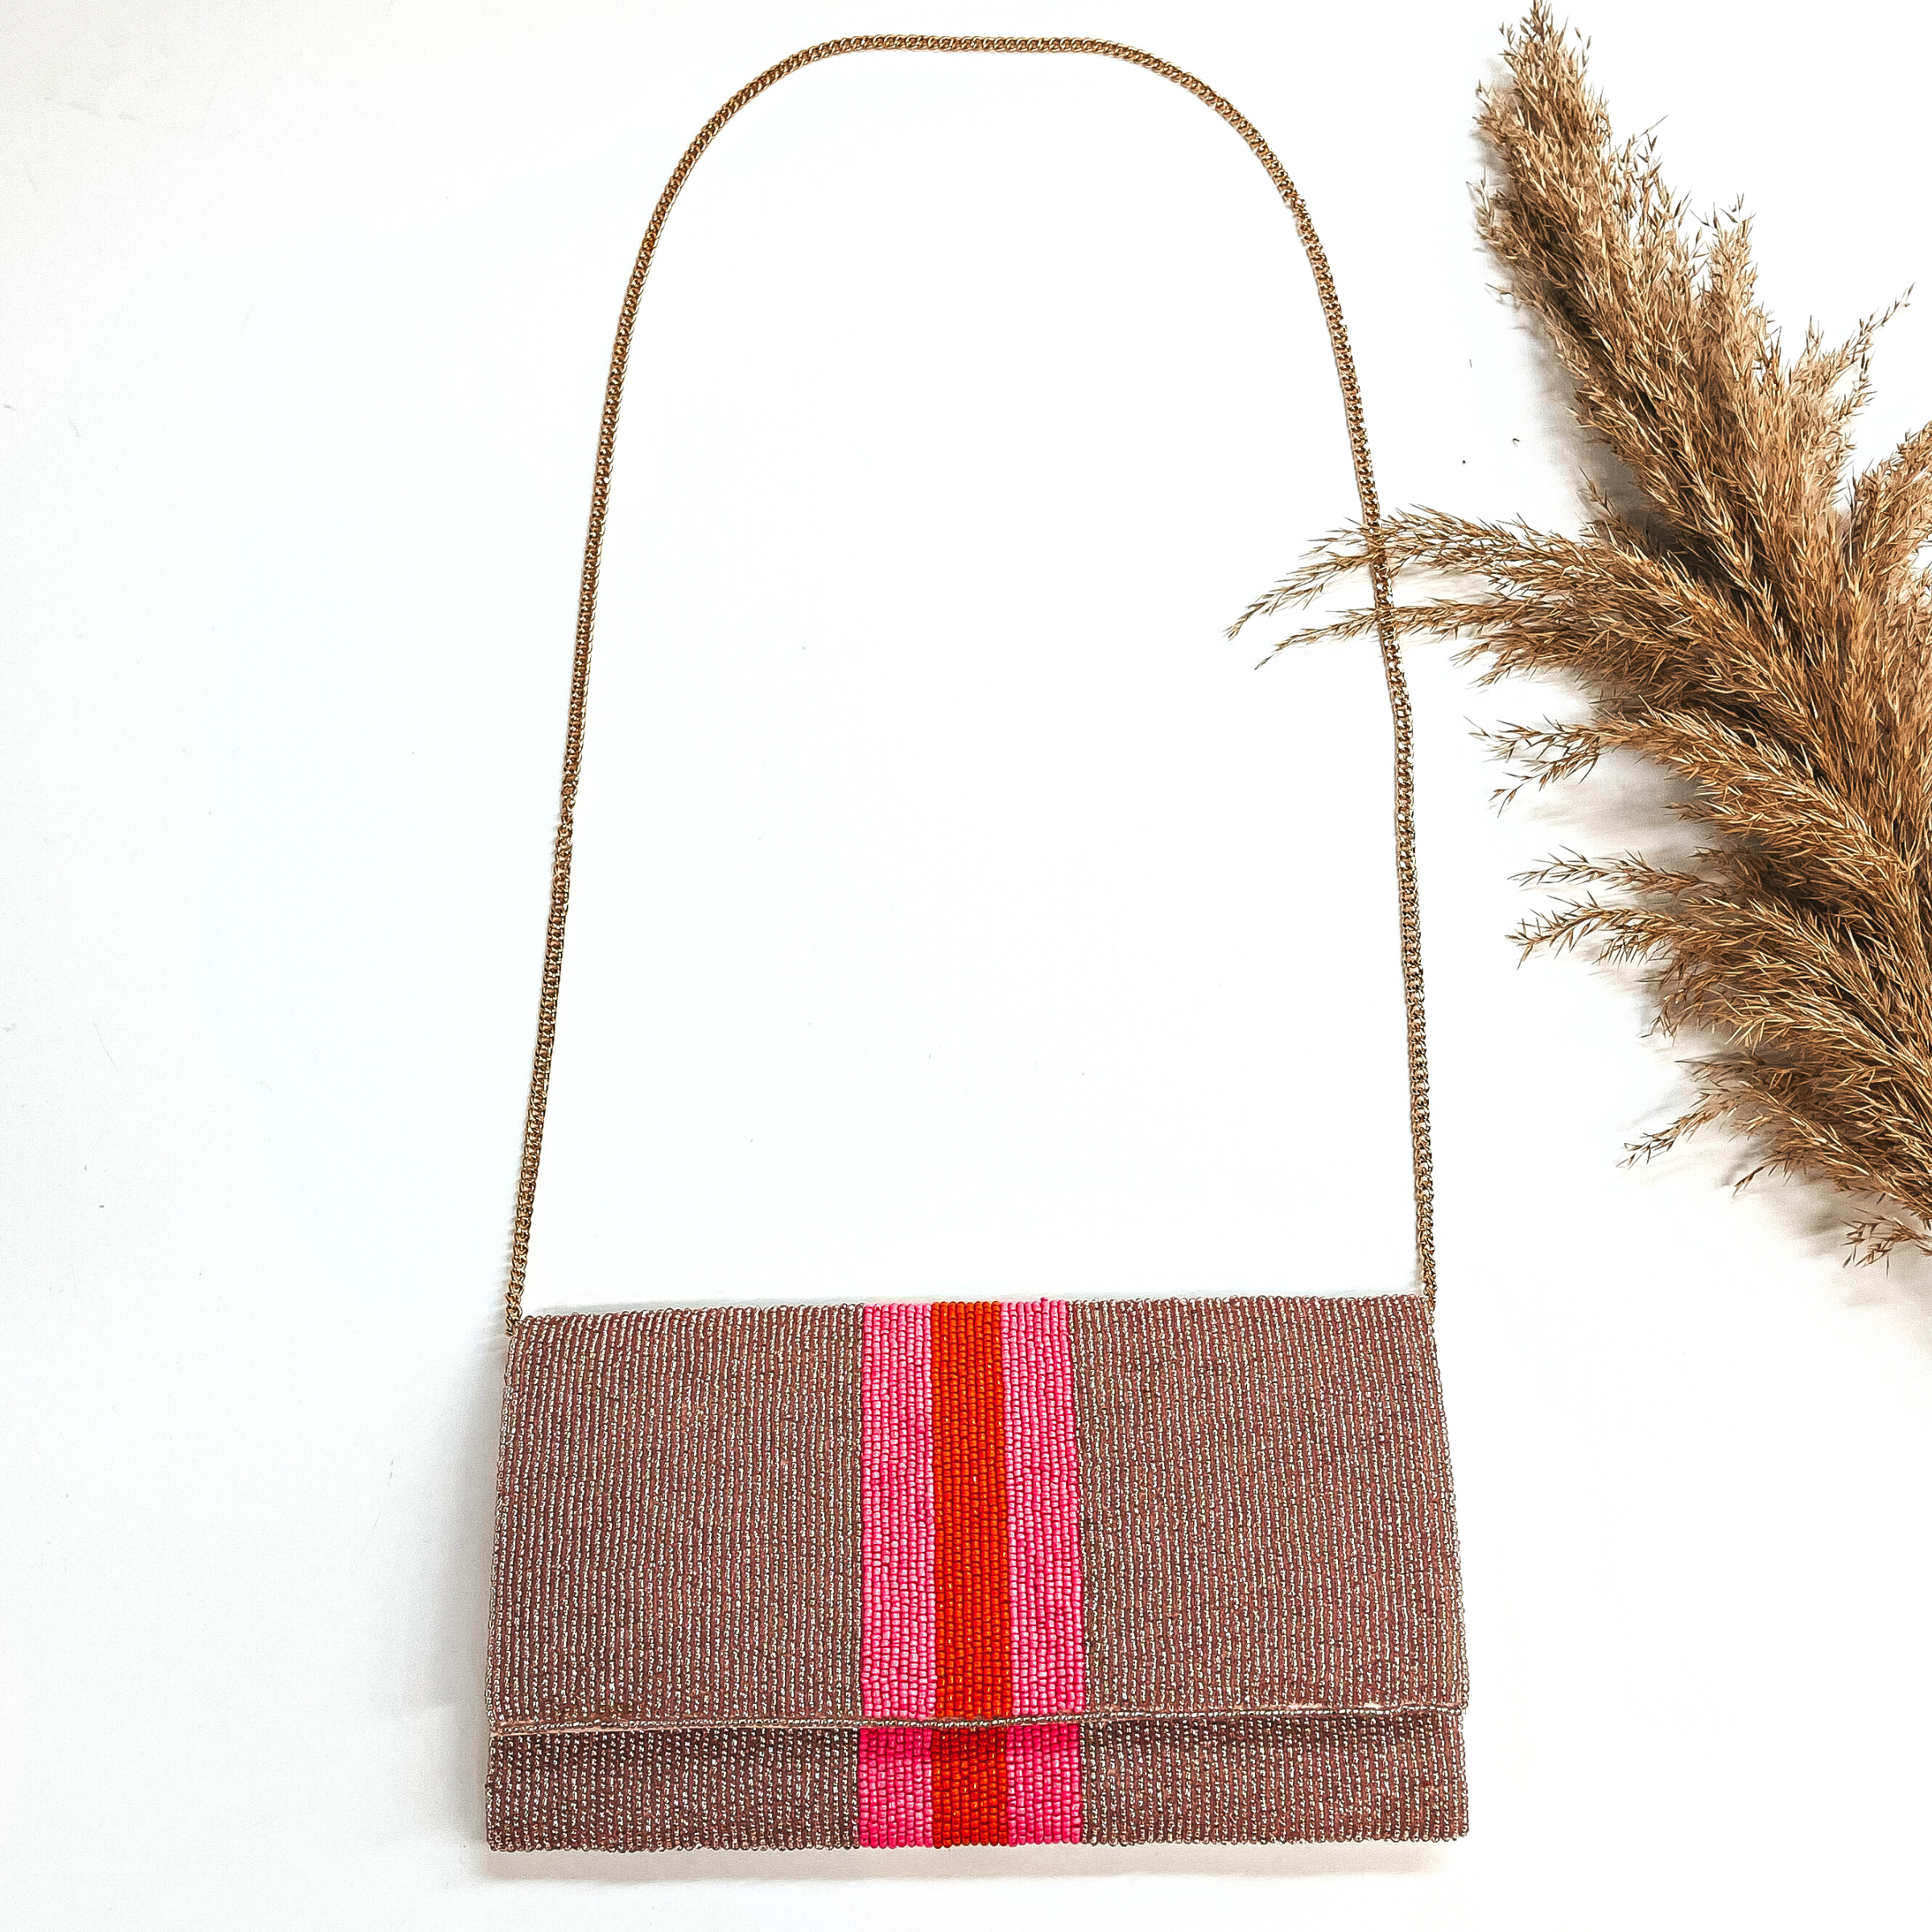 This is a seedbeaded clutch purse with a gold tone chain. This bag is in rose gold with  three stripes in the middle, two hot pink and one orange line in the middle. This bag  is taken laying on a white background with a brown plant in the side as decor.